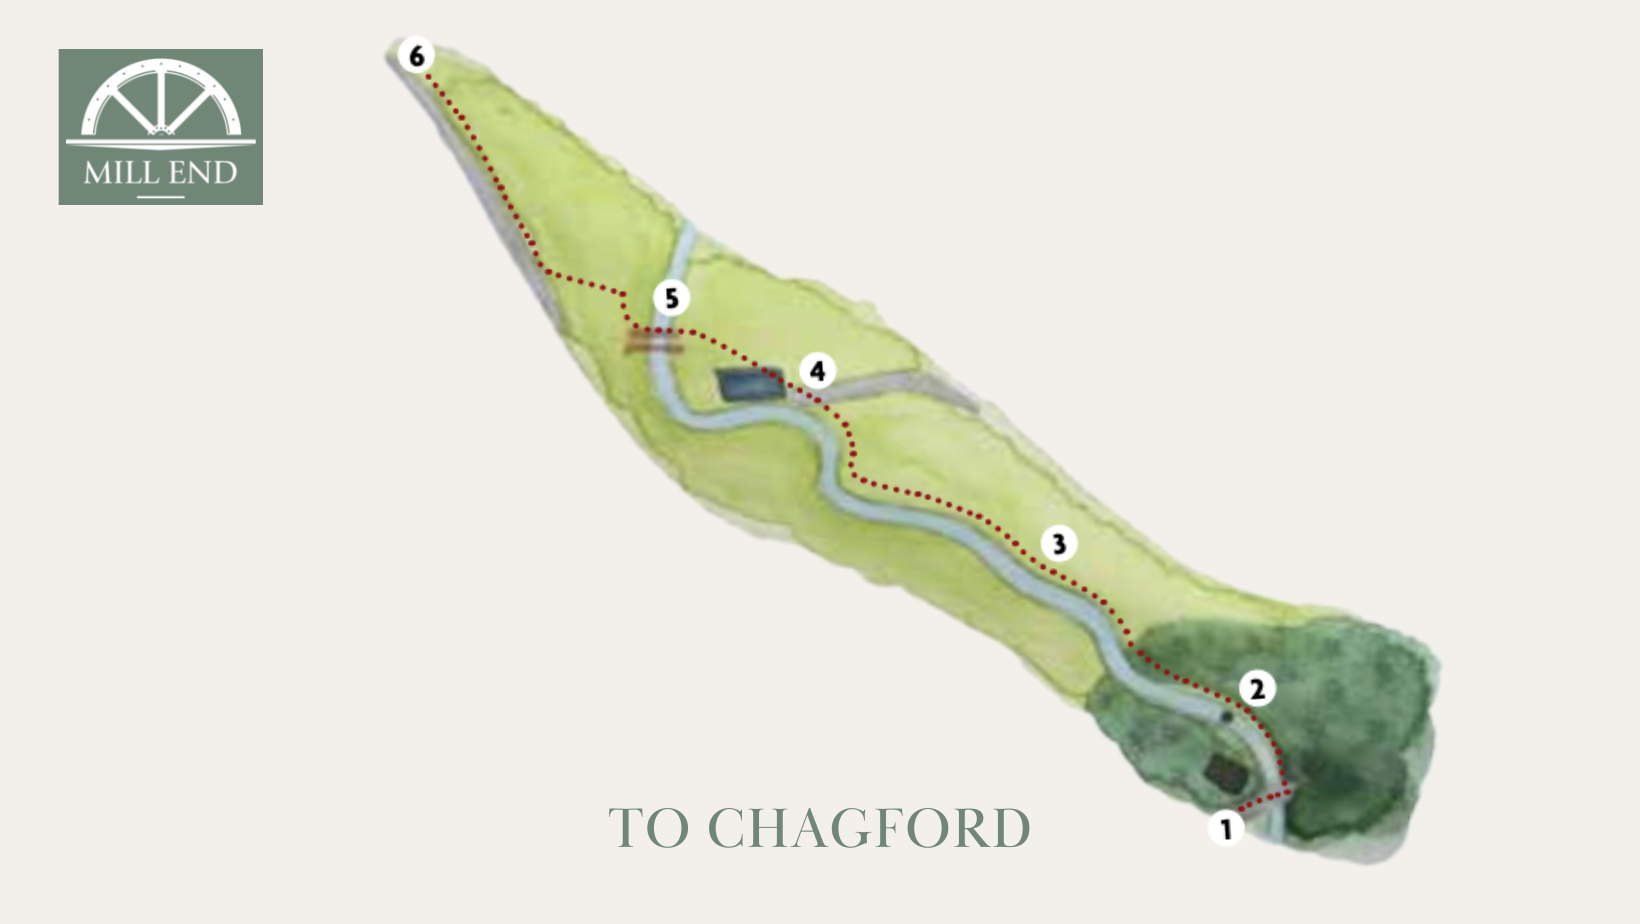 Walk to Chagford Map